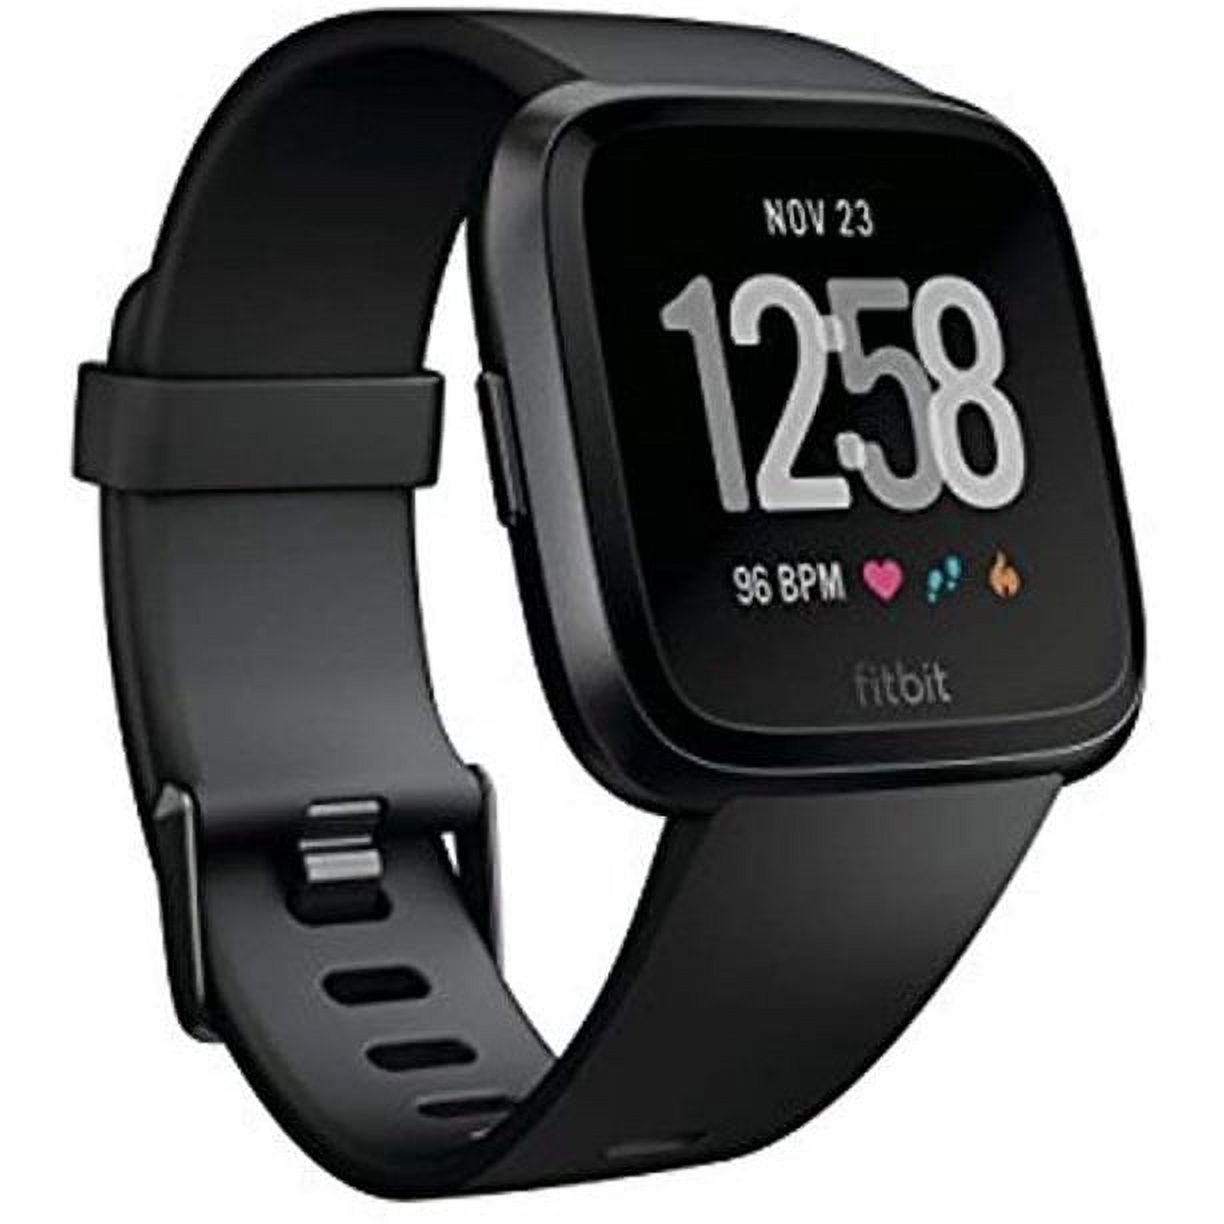 Fitbit Versa Smart Watch, Black/Black Aluminium, One Size (S & L Bands Included) - image 1 of 11